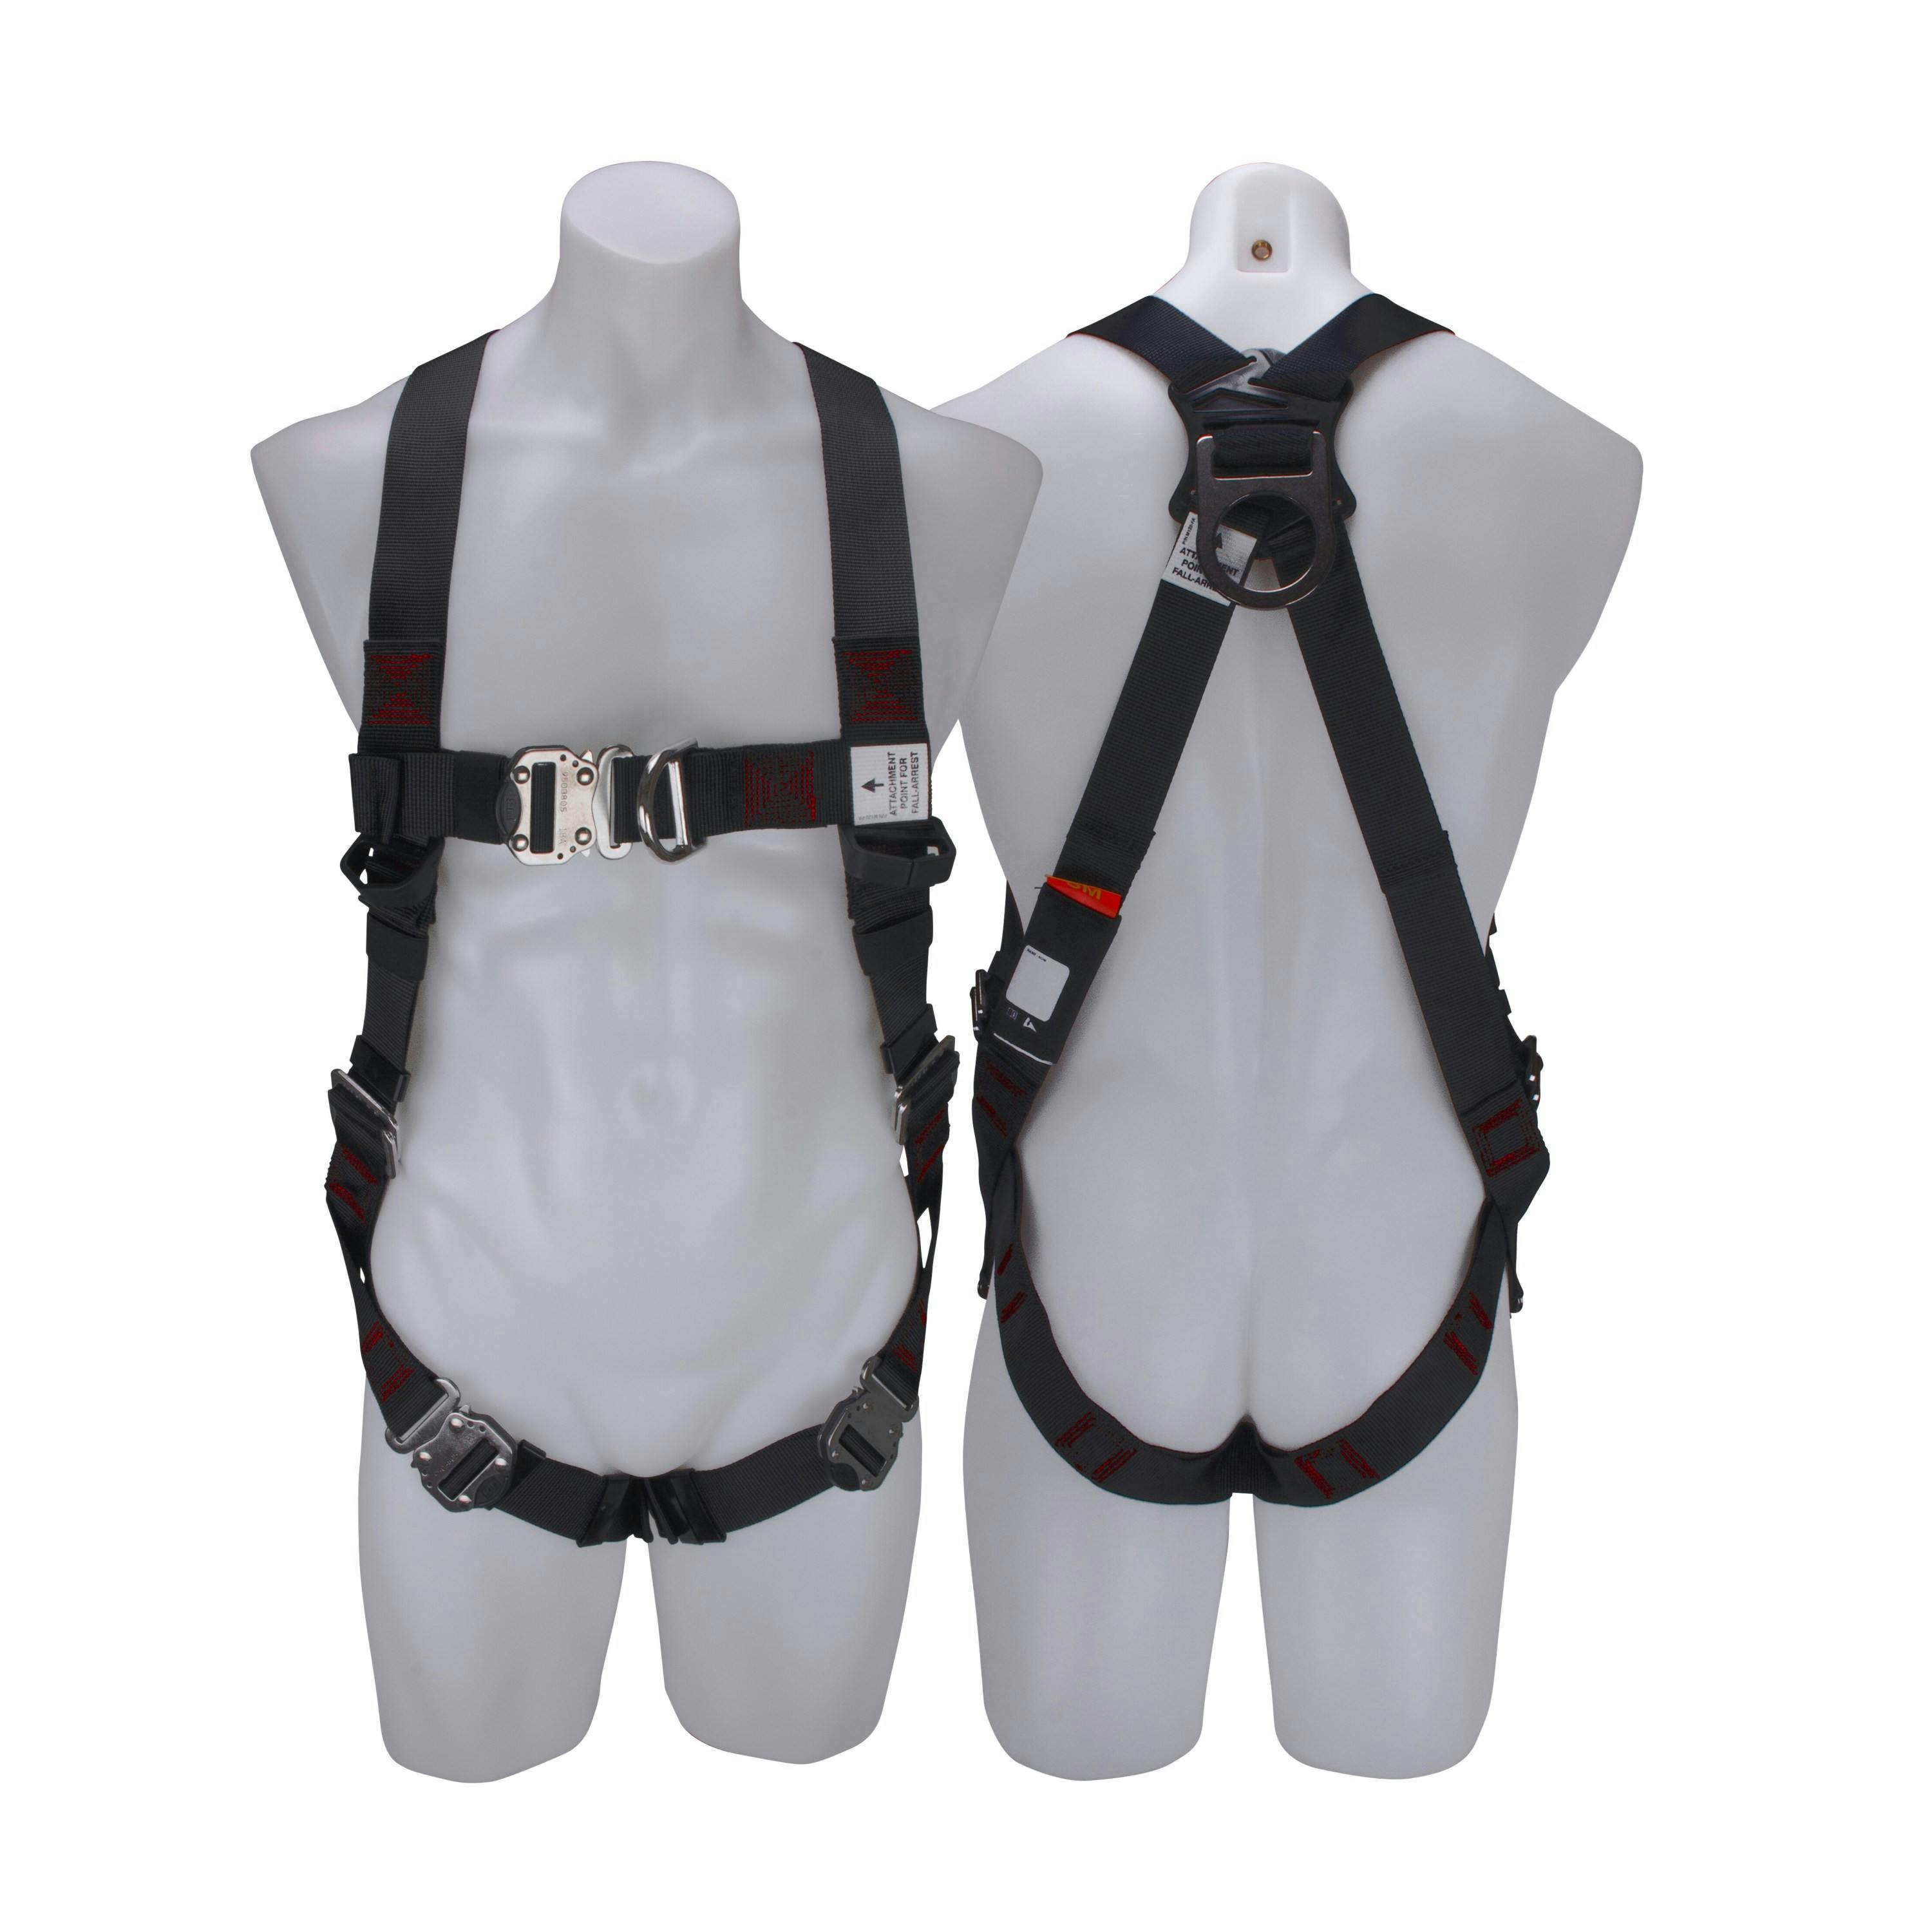 3M™ PROTECTA® X Riggers Harness with Stainless Steel 1161664, Red and Black, Small, 1 EA/Case